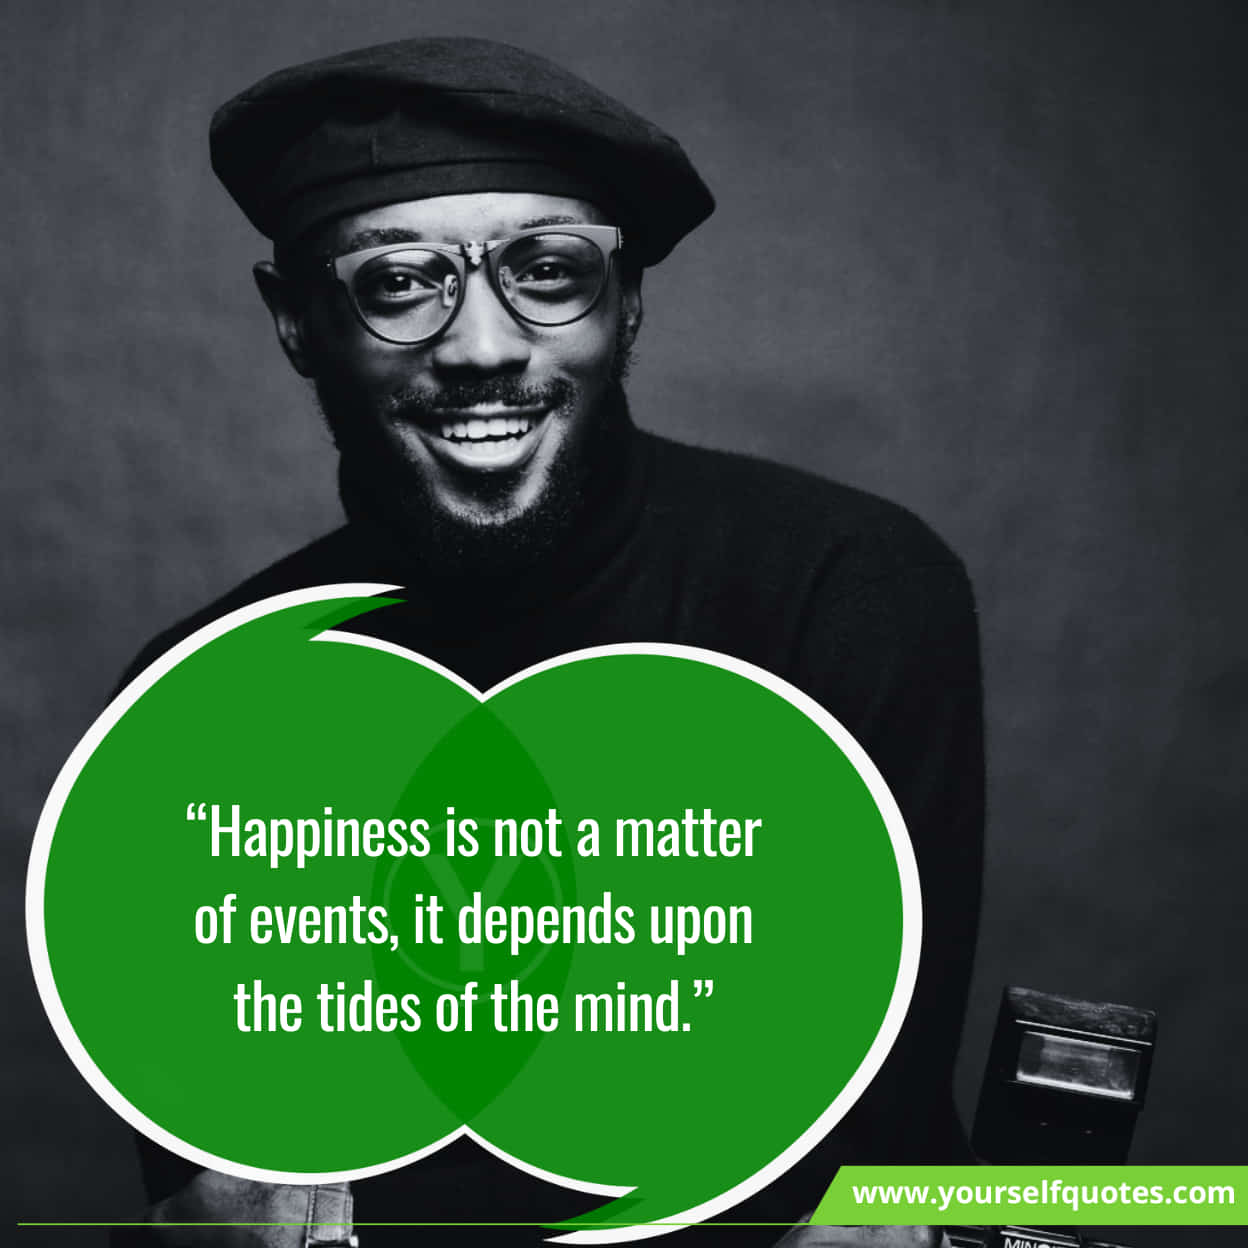 Famous Inspirational Quotes On Happiness